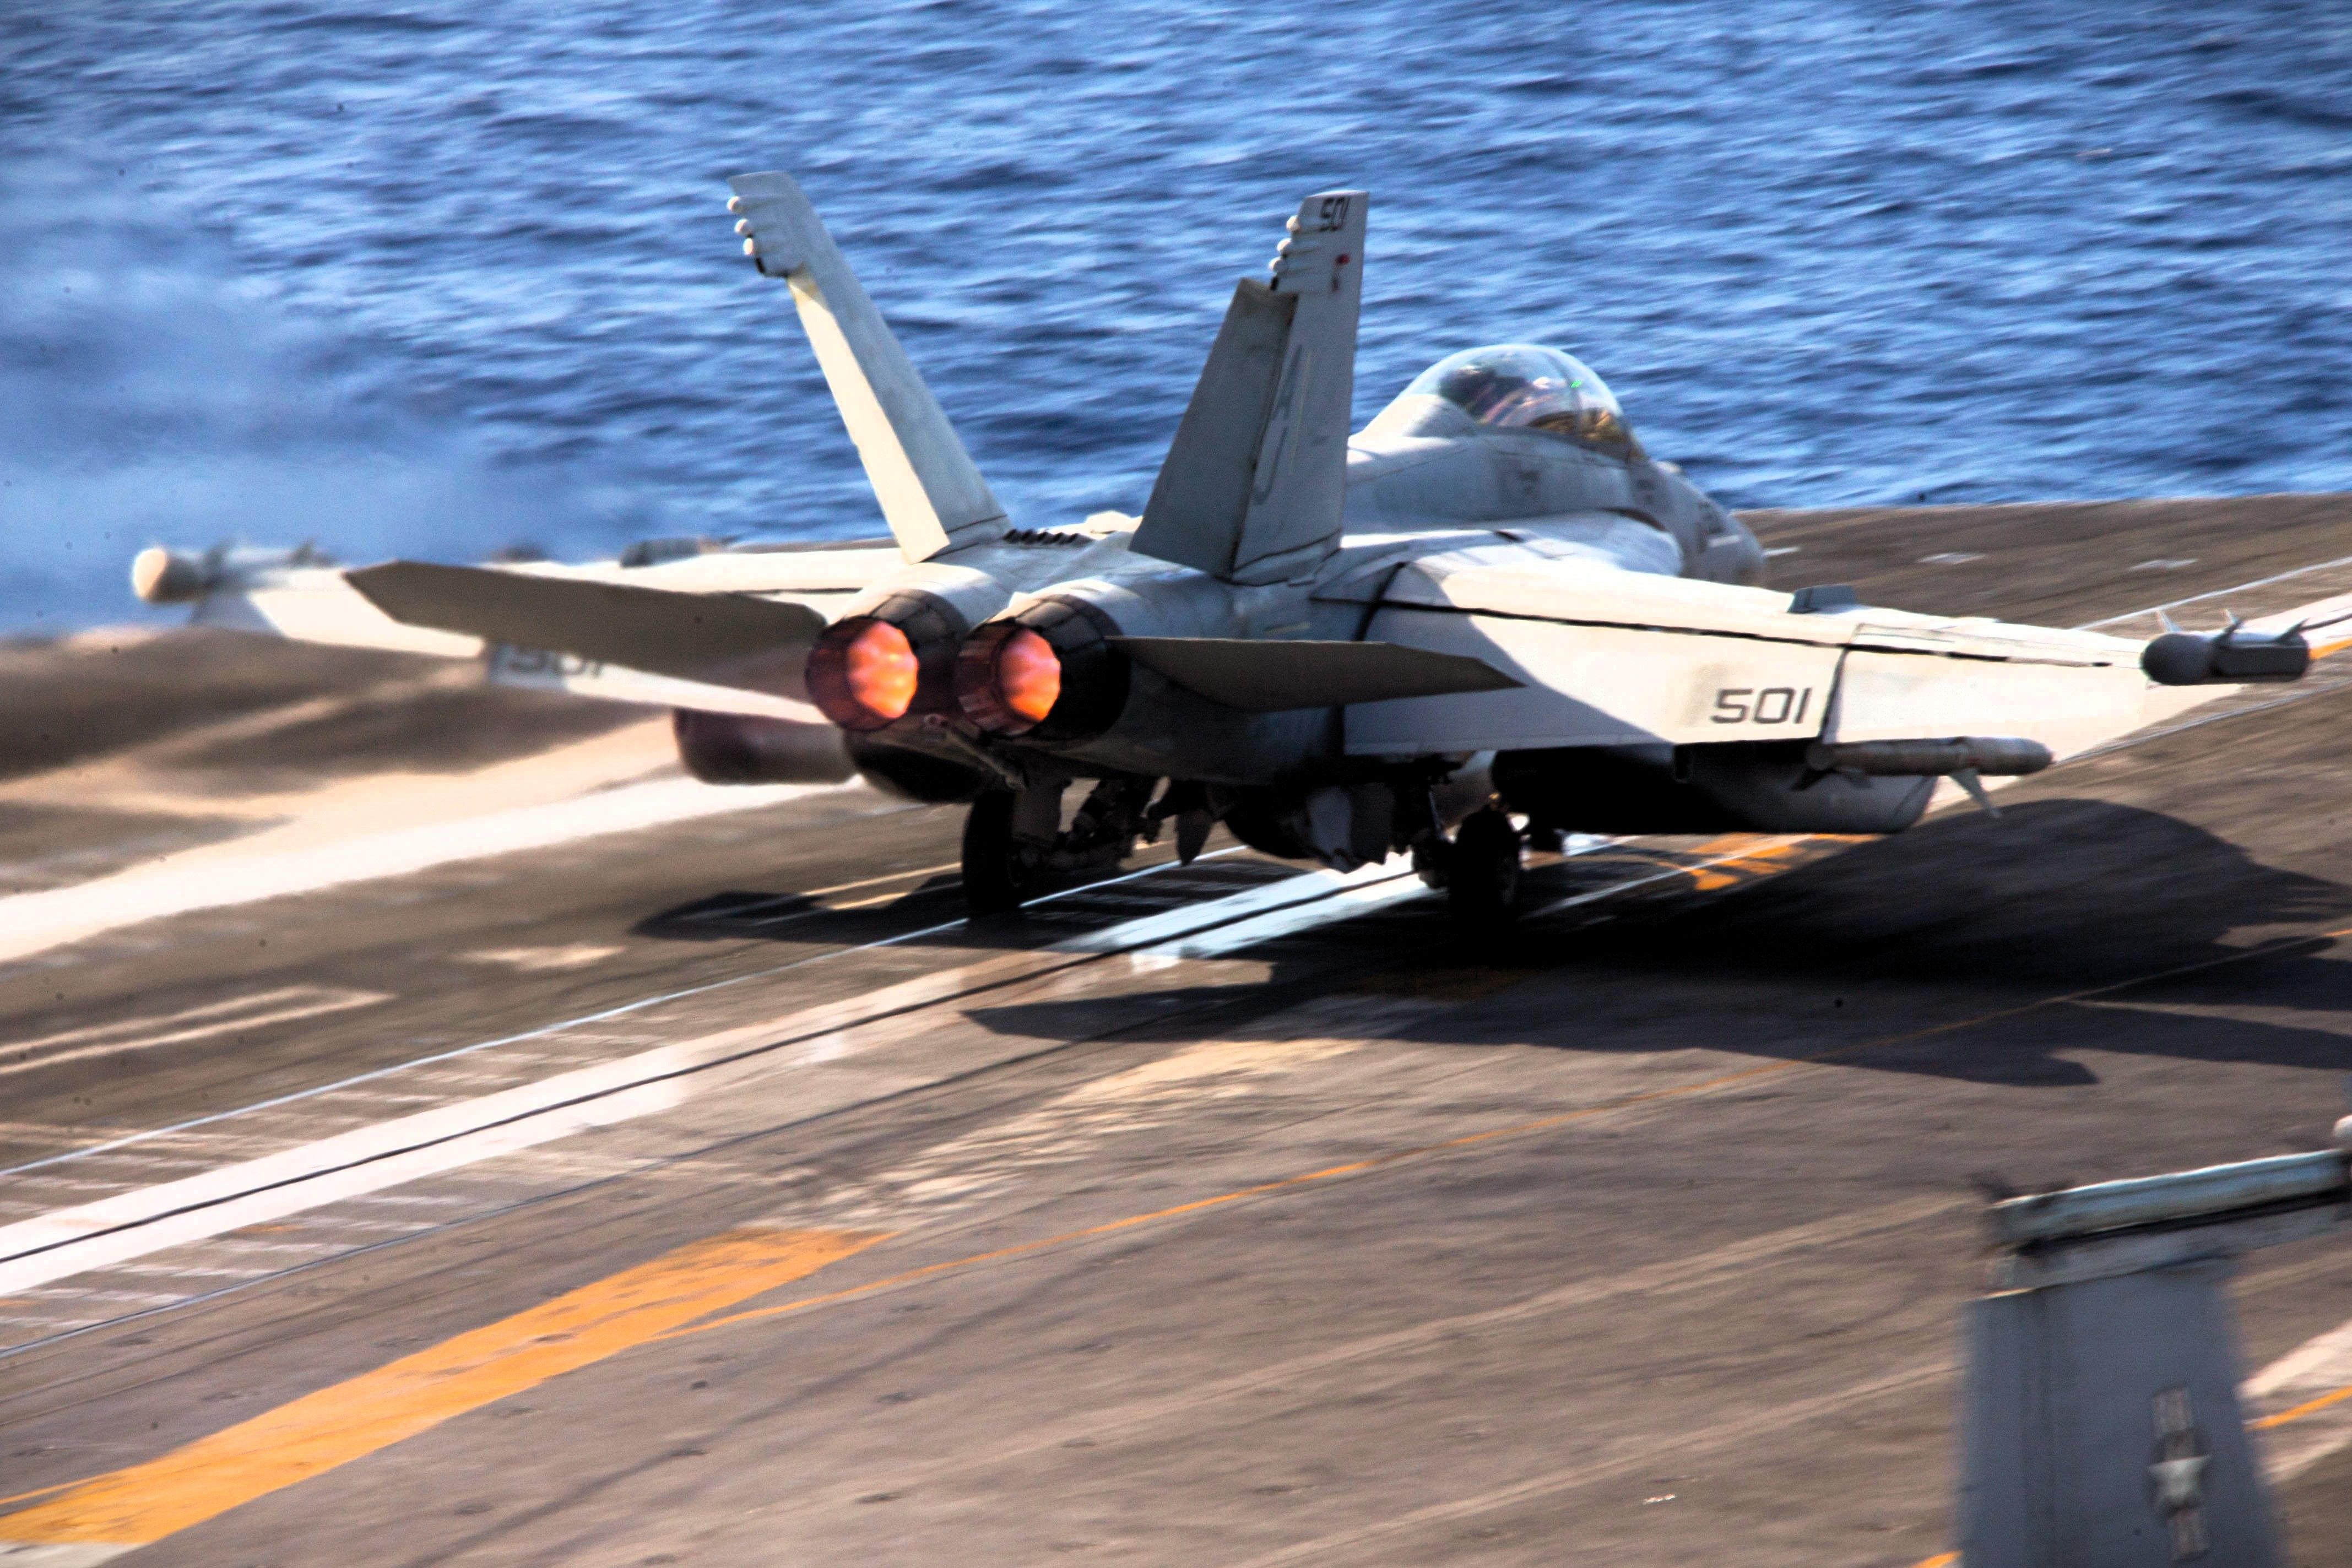 8183511 - Flight Operations [Image 39 of 51] - Boeing Ea-18G Growler launching from USS Gerald Ford with EMALS